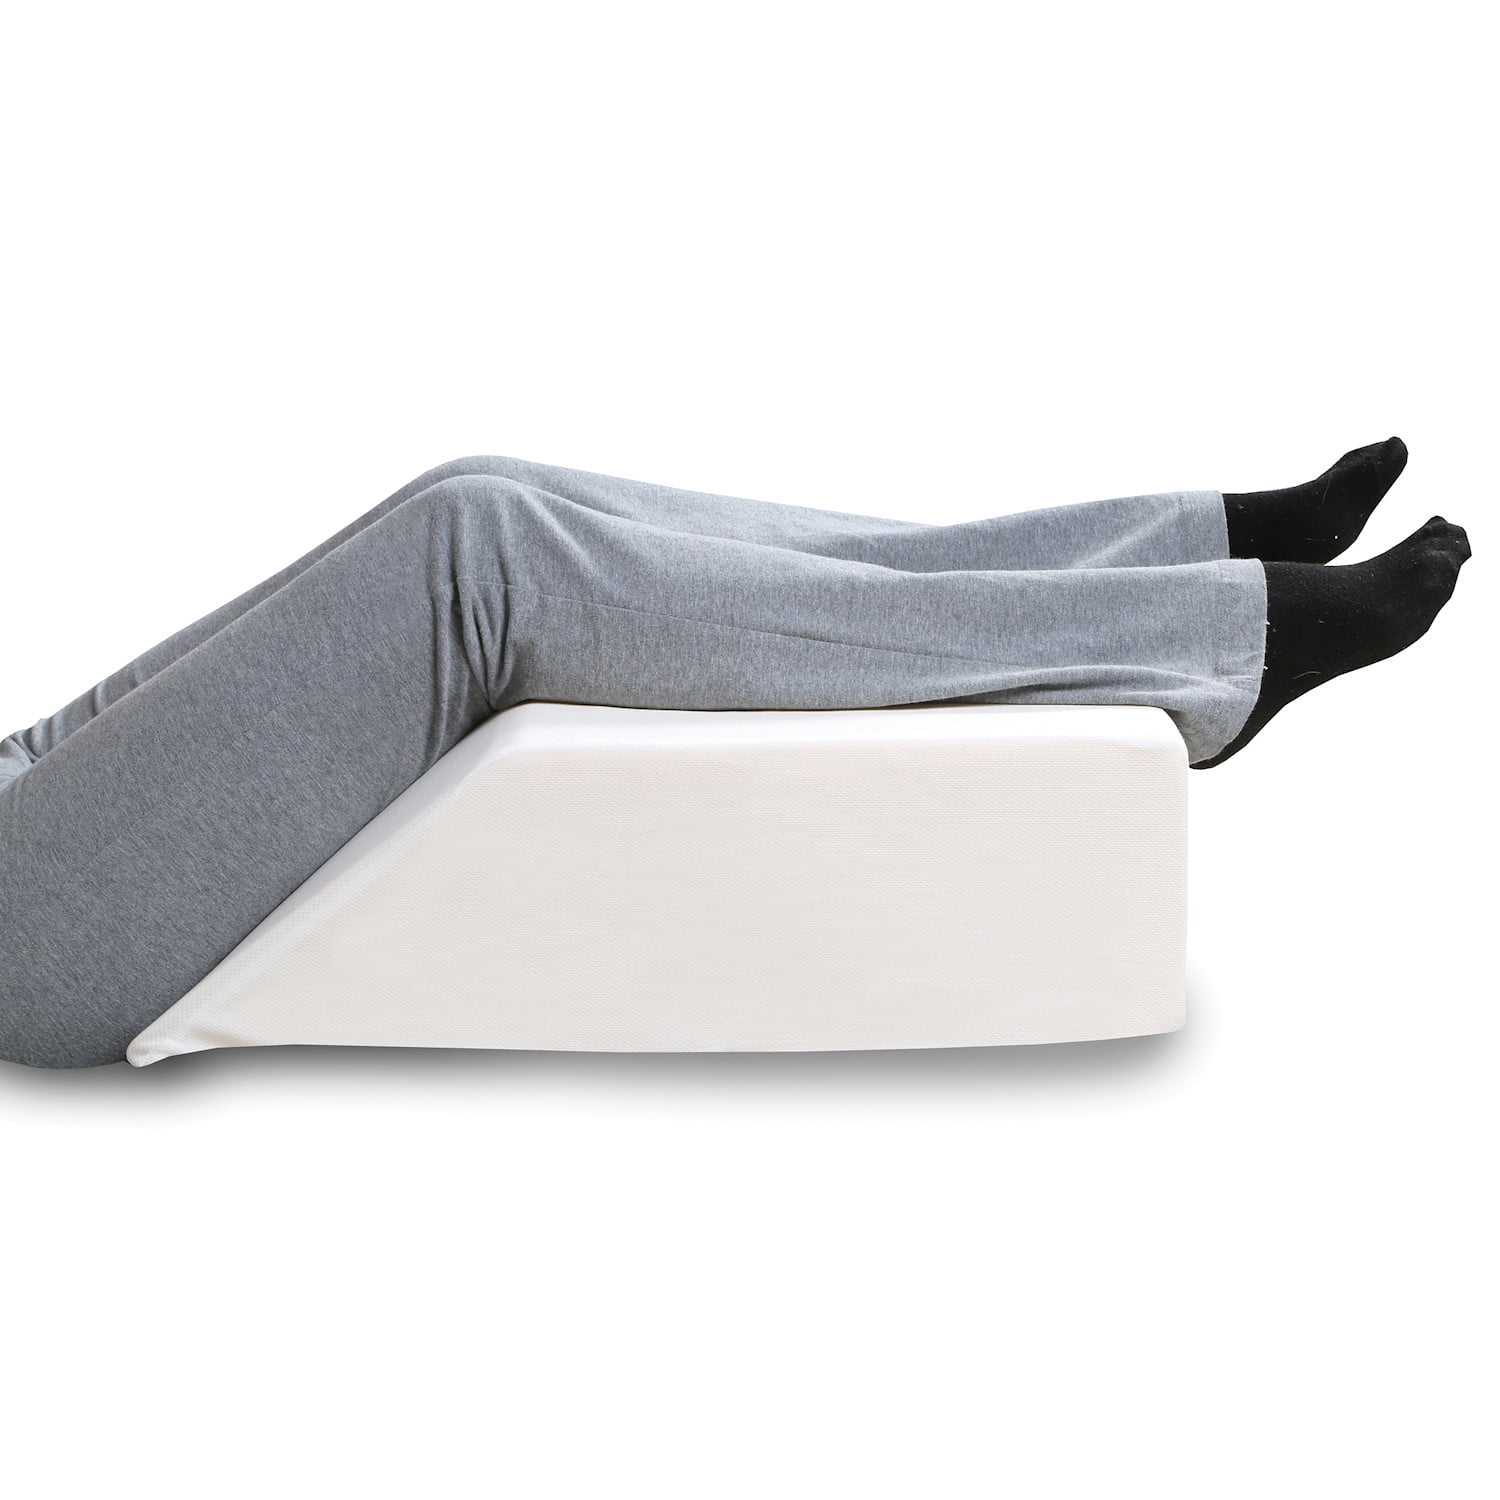 Elevated Leg Wedge Pillow, Relieves 